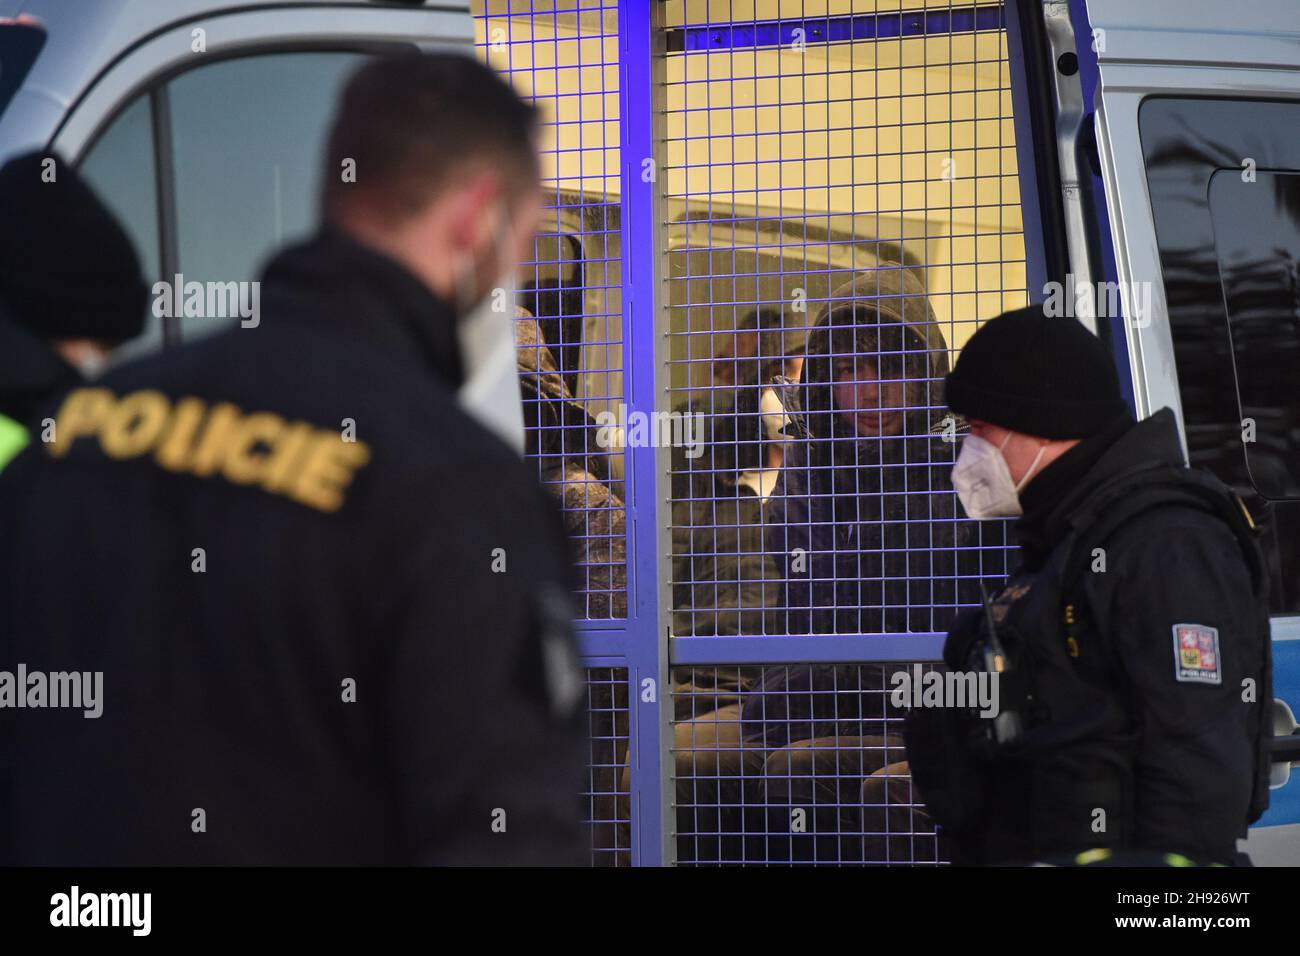 Lanzhot, Czech Republic. 03rd Dec, 2021. The south Moravian police detained 26 migrants in two separate cases in Czechia's southernmost Breclav district, Czech Republic, December 3, 2021, the first vehicle, a VW Sharan, being stopped for a road check and the other, a Chrysler Voyager, halted by a patrol in a civilian car after a several-minute pursuit. Credit: Vaclav Salek/CTK Photo/Alamy Live News Stock Photo